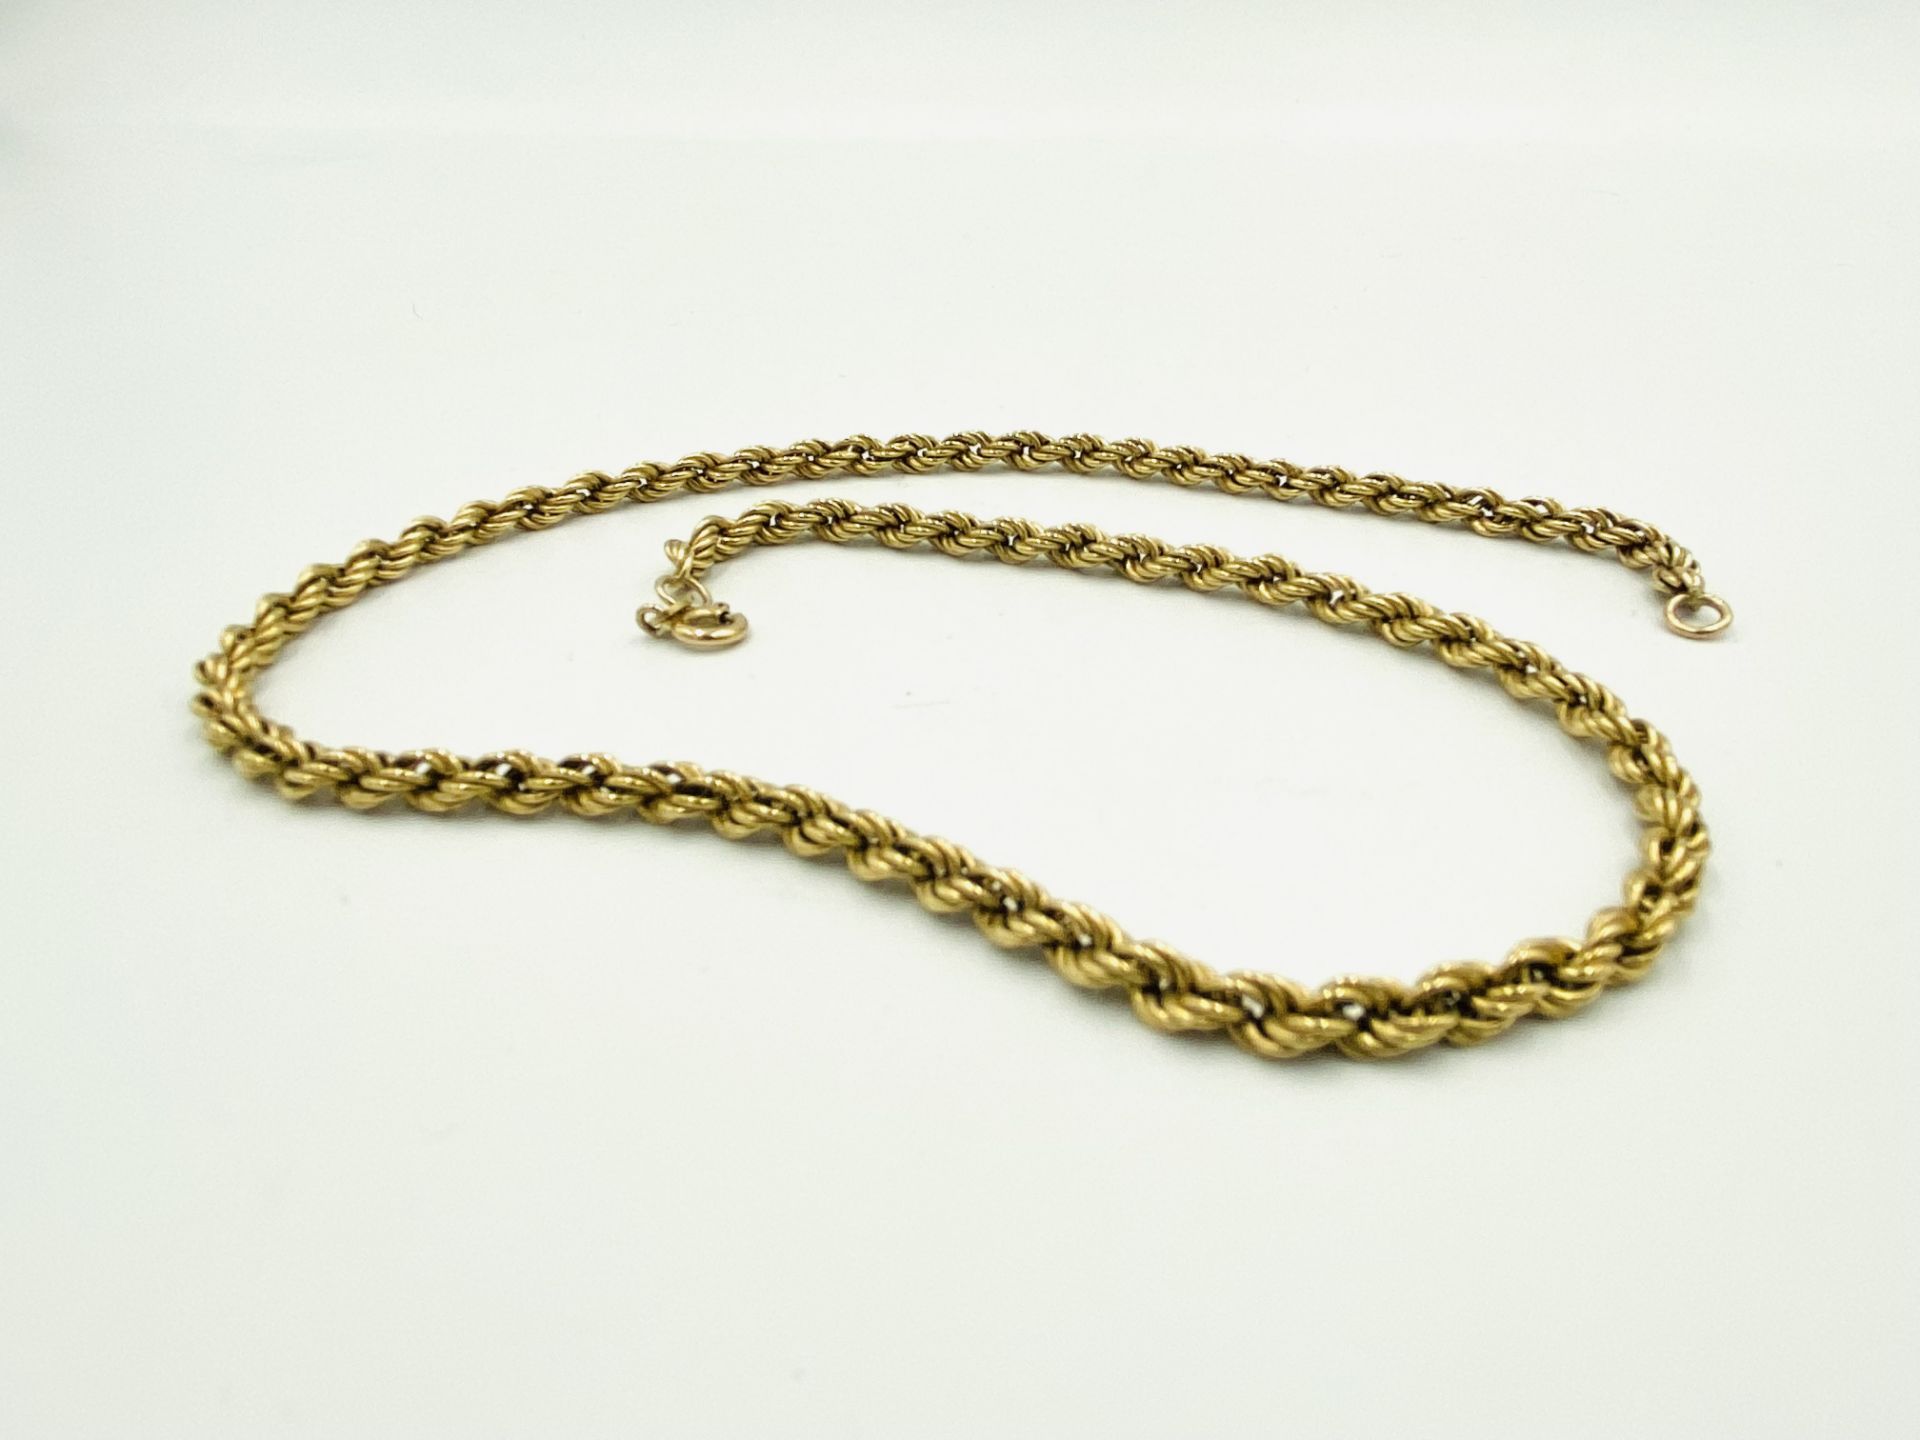 9ct gold rope twist chain - Image 5 of 5